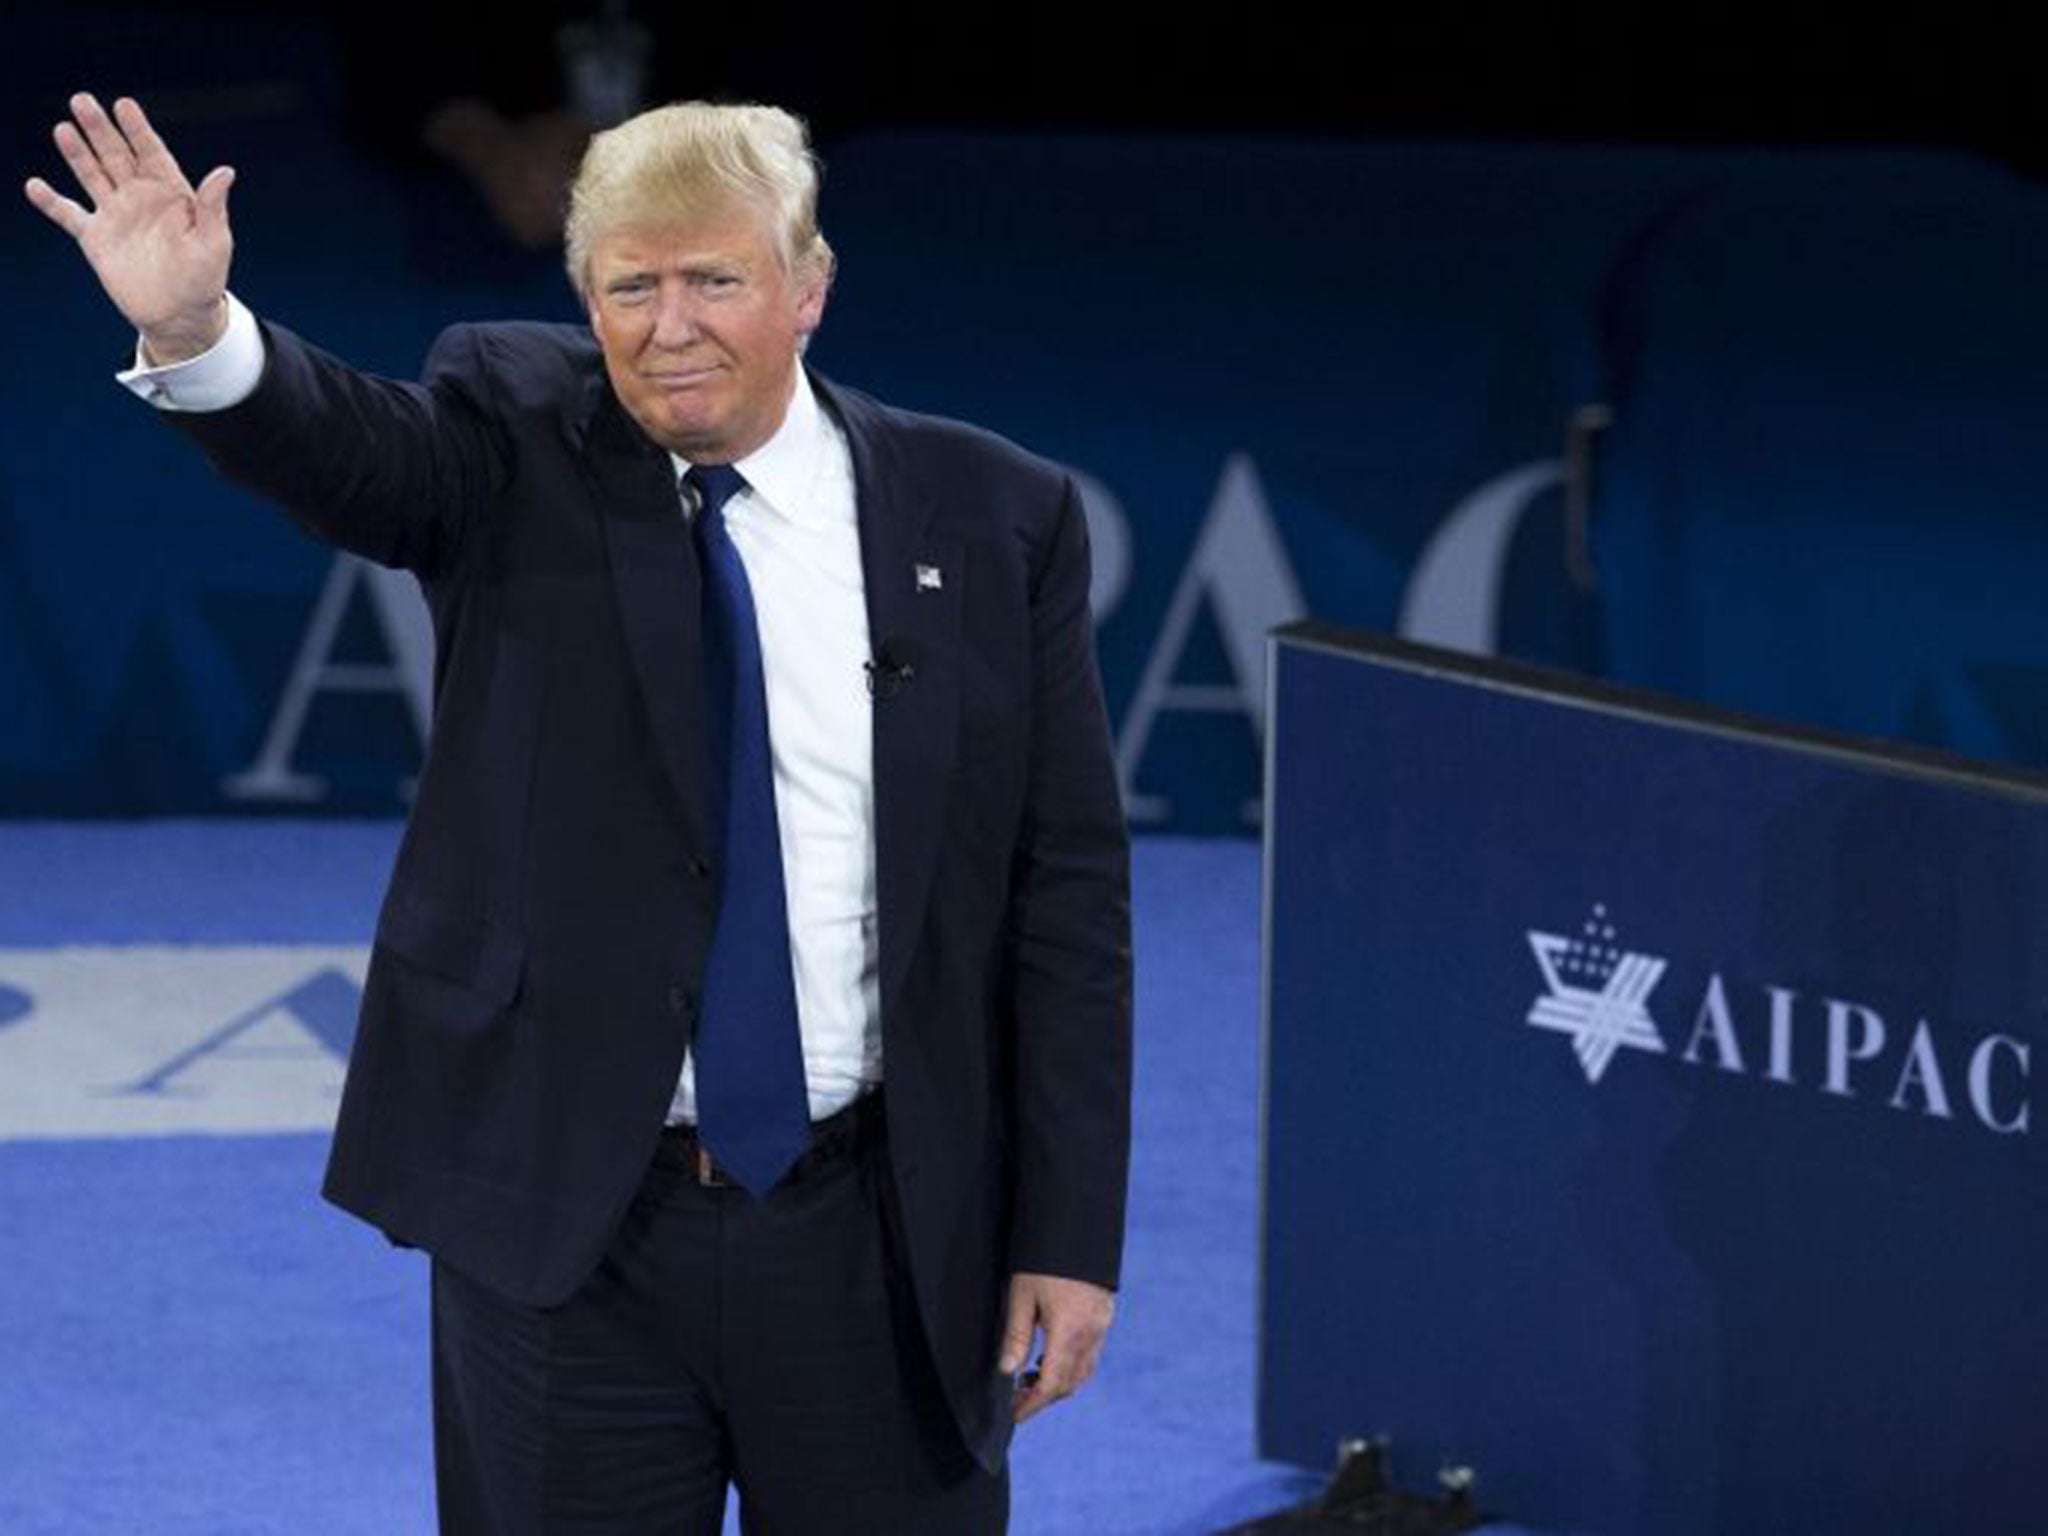 Donald Trump waves at the crowd following his address to the American Israel Public Affairs Committee (AIPAC) in Washington